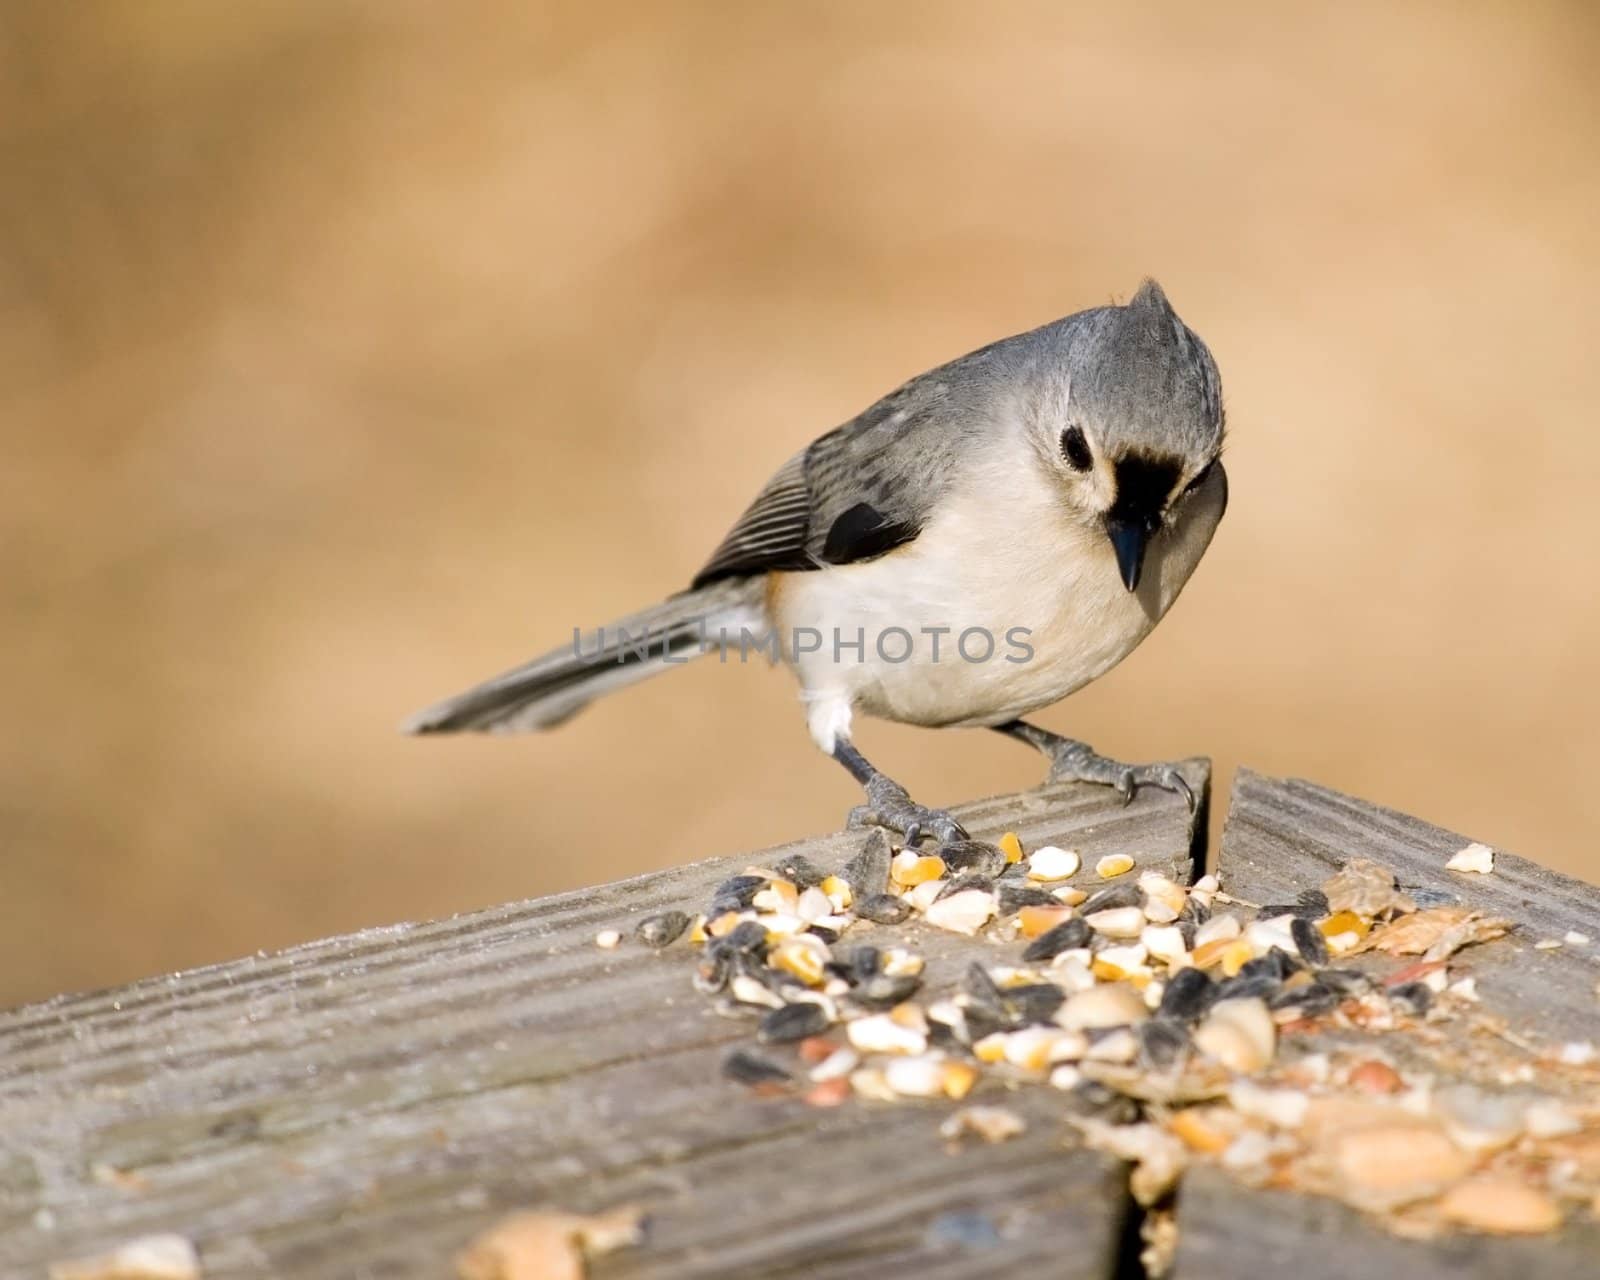 A tufted titmouse looking down on bird seed.